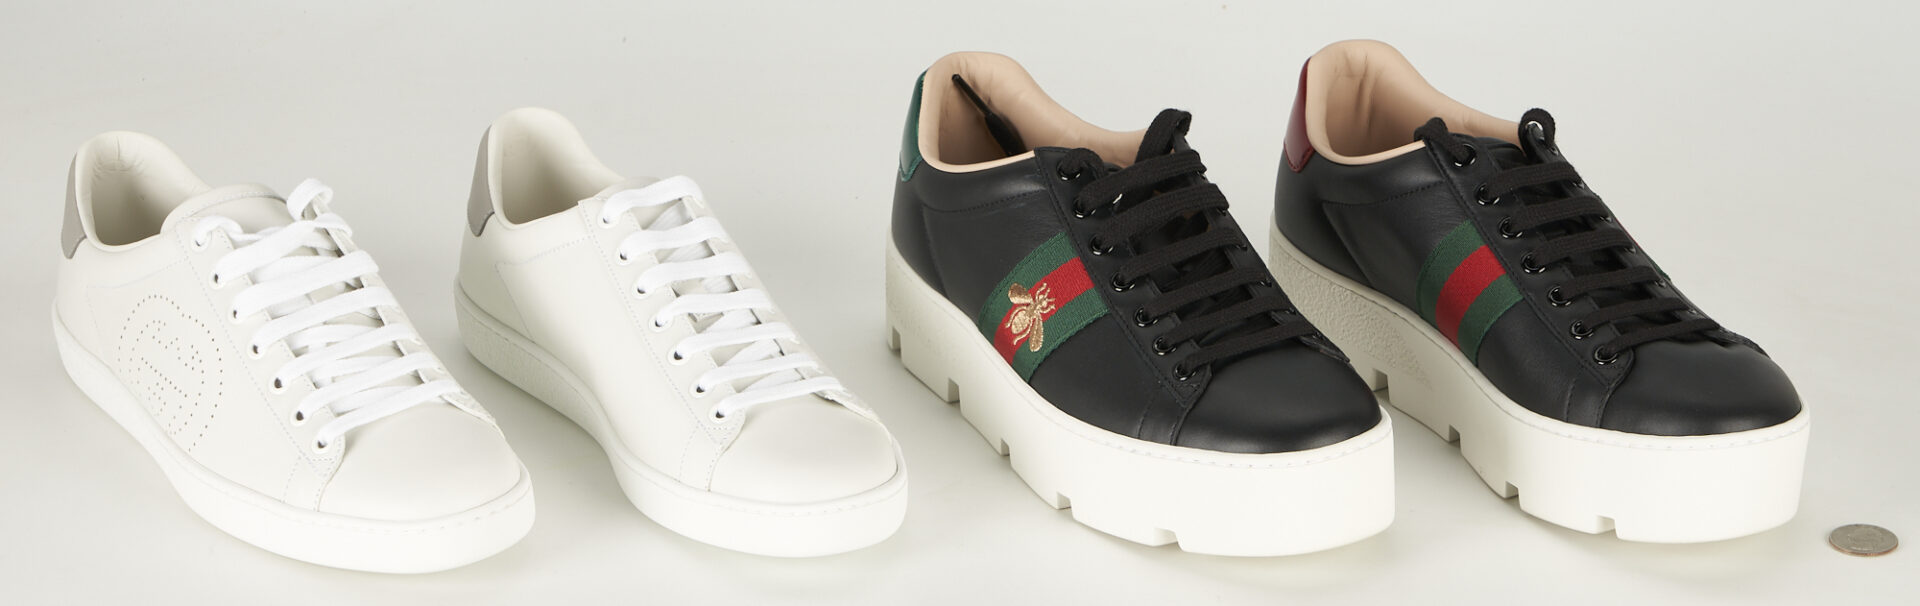 Lot 102: 2 Pairs of Gucci Ace Leather Sneakers